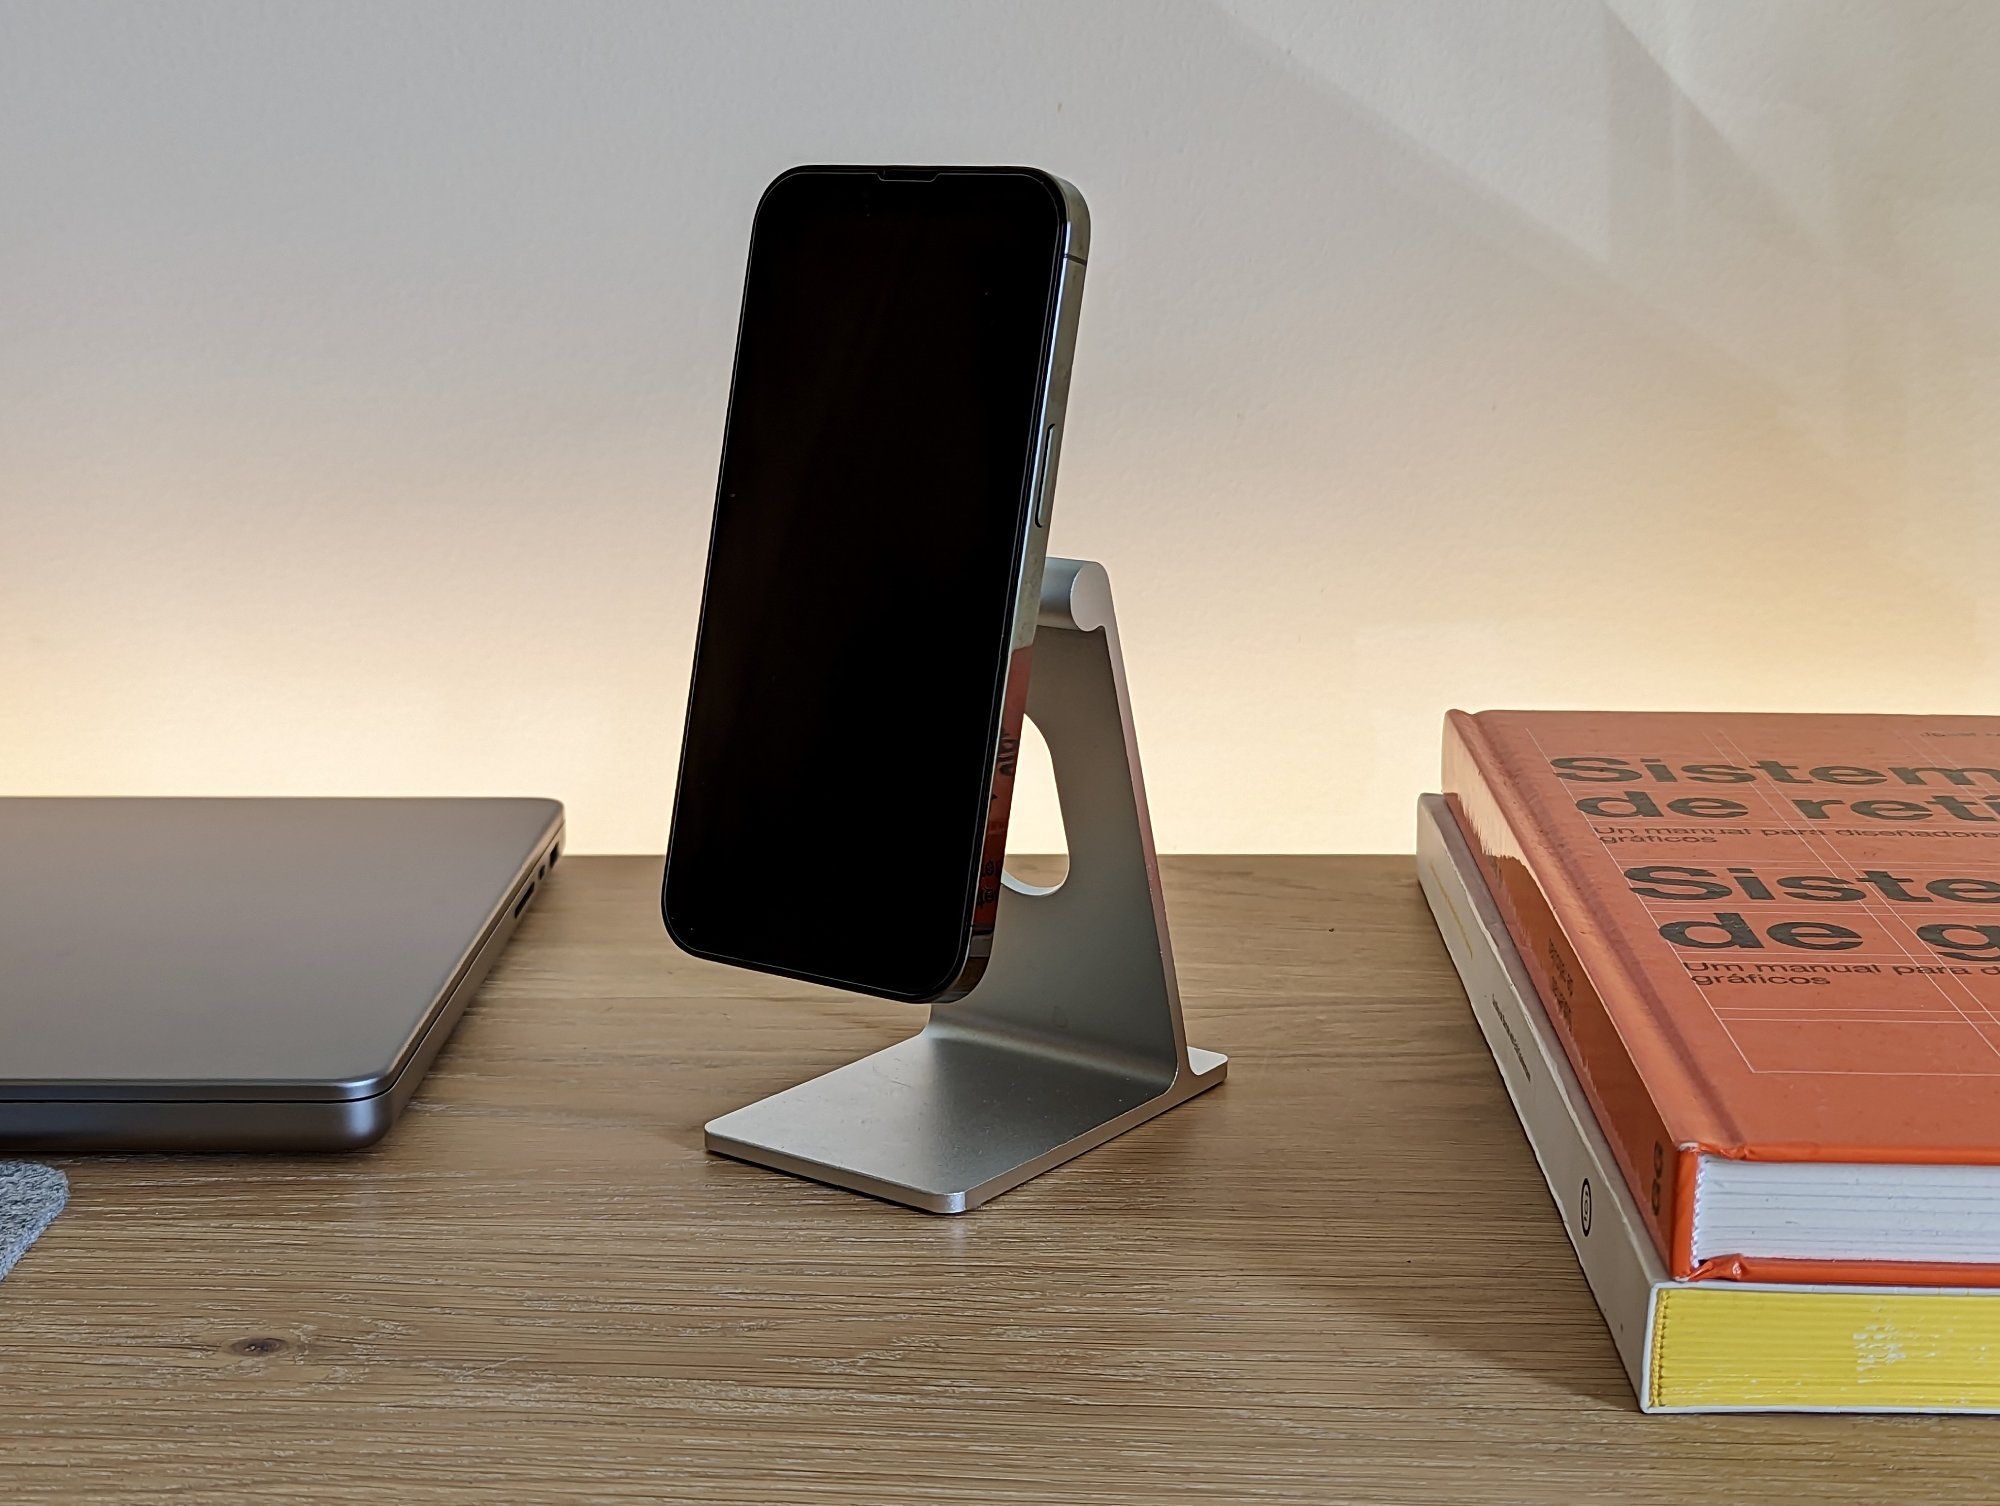 A phone stand with an iPhone on it, a MacBook, and a couple of design books on the desk